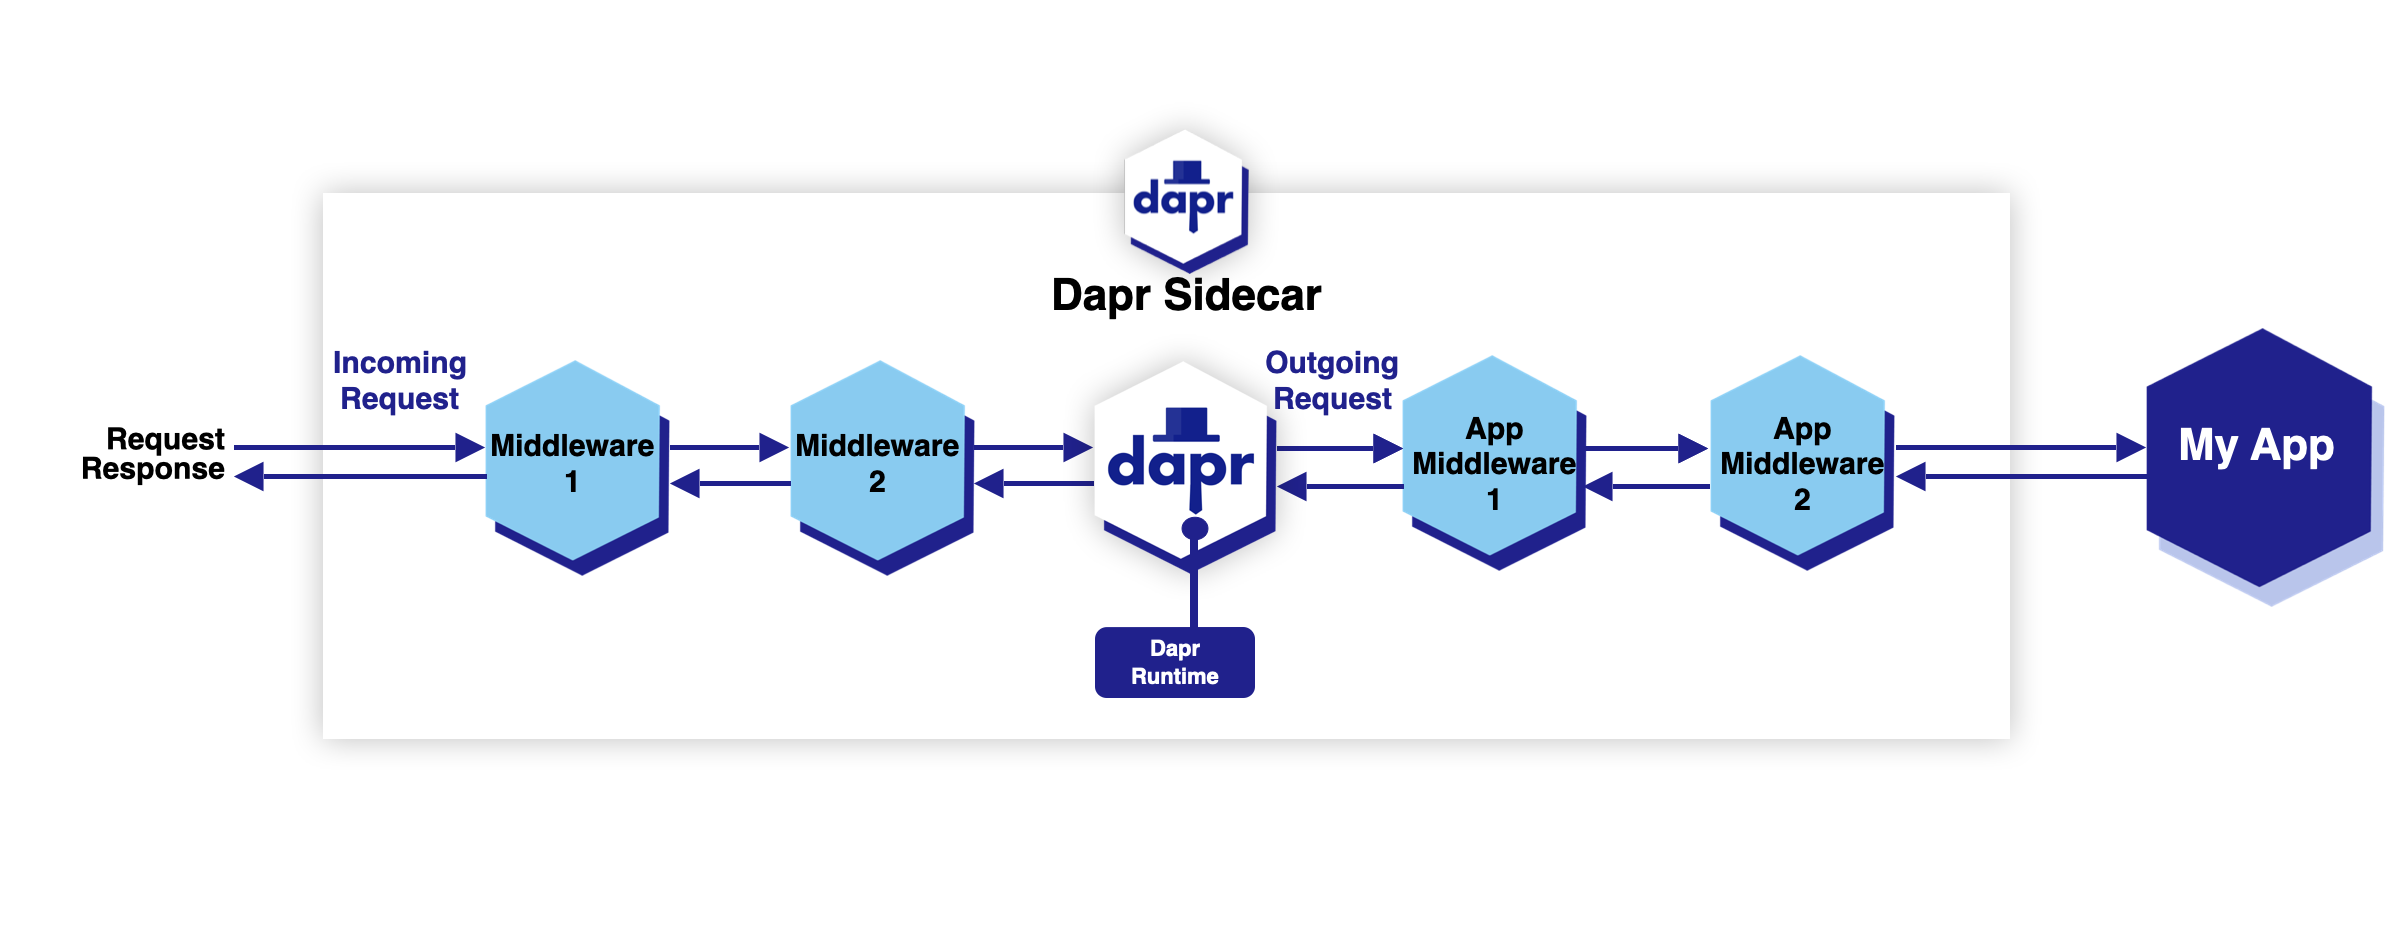 Diagram showing the flow of a service invocation request. Requests from the callee Dapr sidecar to the callee application go through the app middleware pipeline as described in the paragraph above.